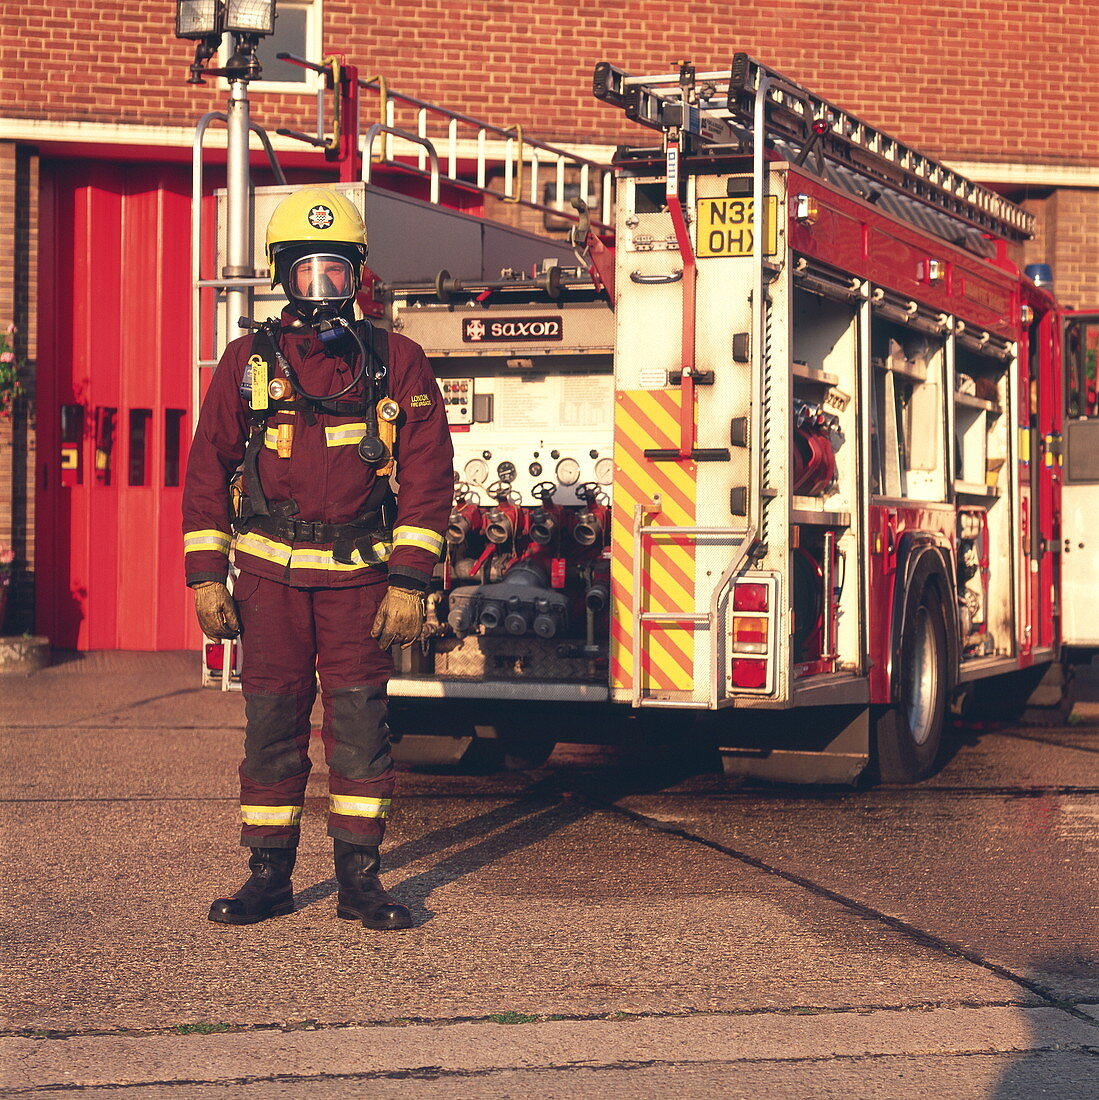 Firefighter and engine